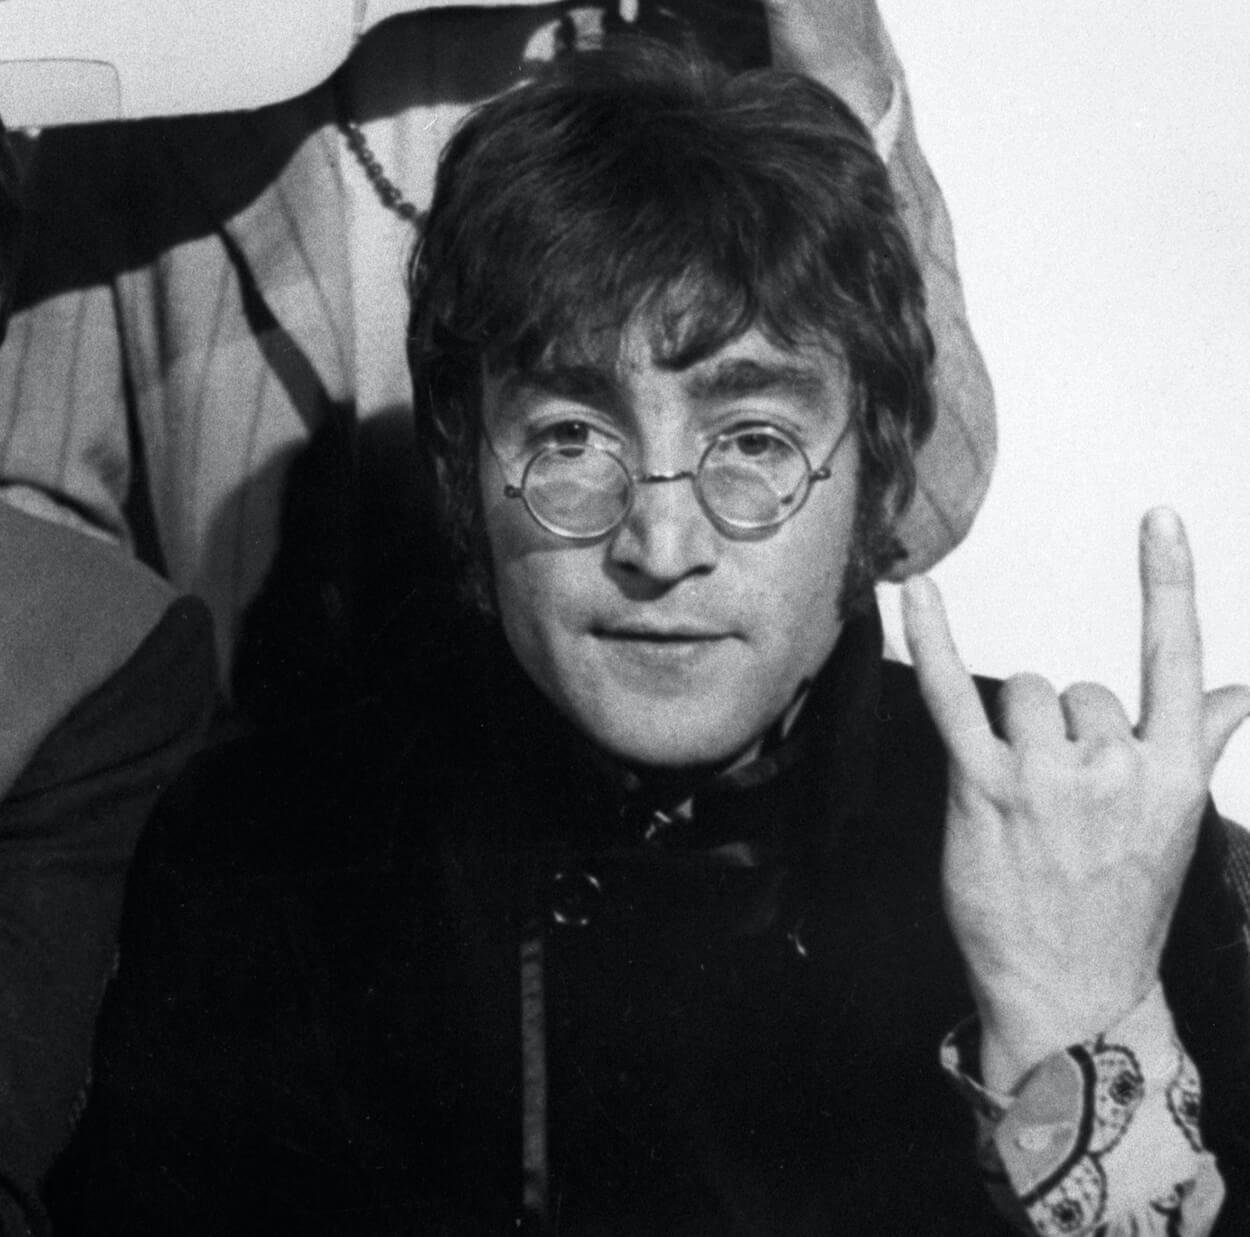 John Lennon wearing round glasses and extending the index finger and pinkie of his left hand into the air circa 1967.